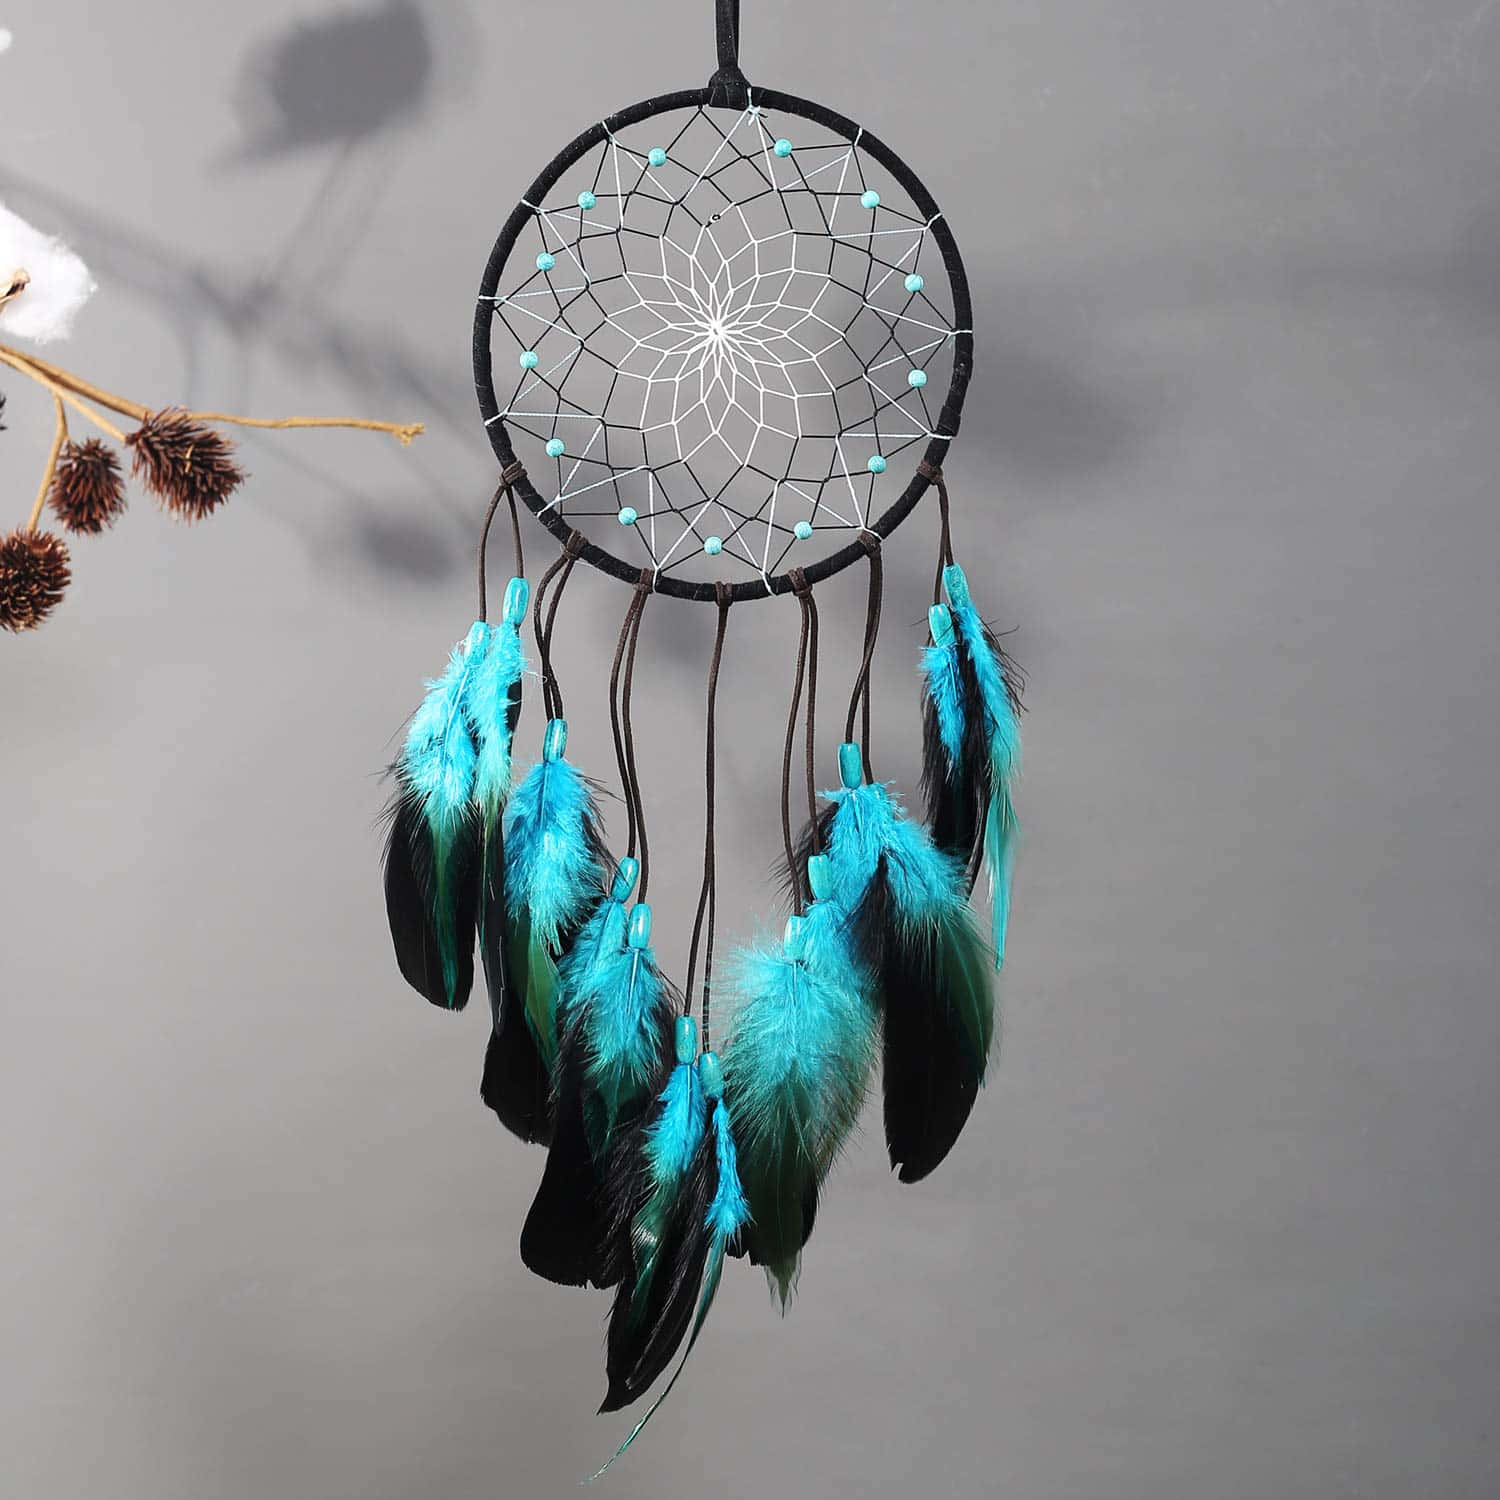 A Blue And Black Dream Catcher Hanging From A Branch